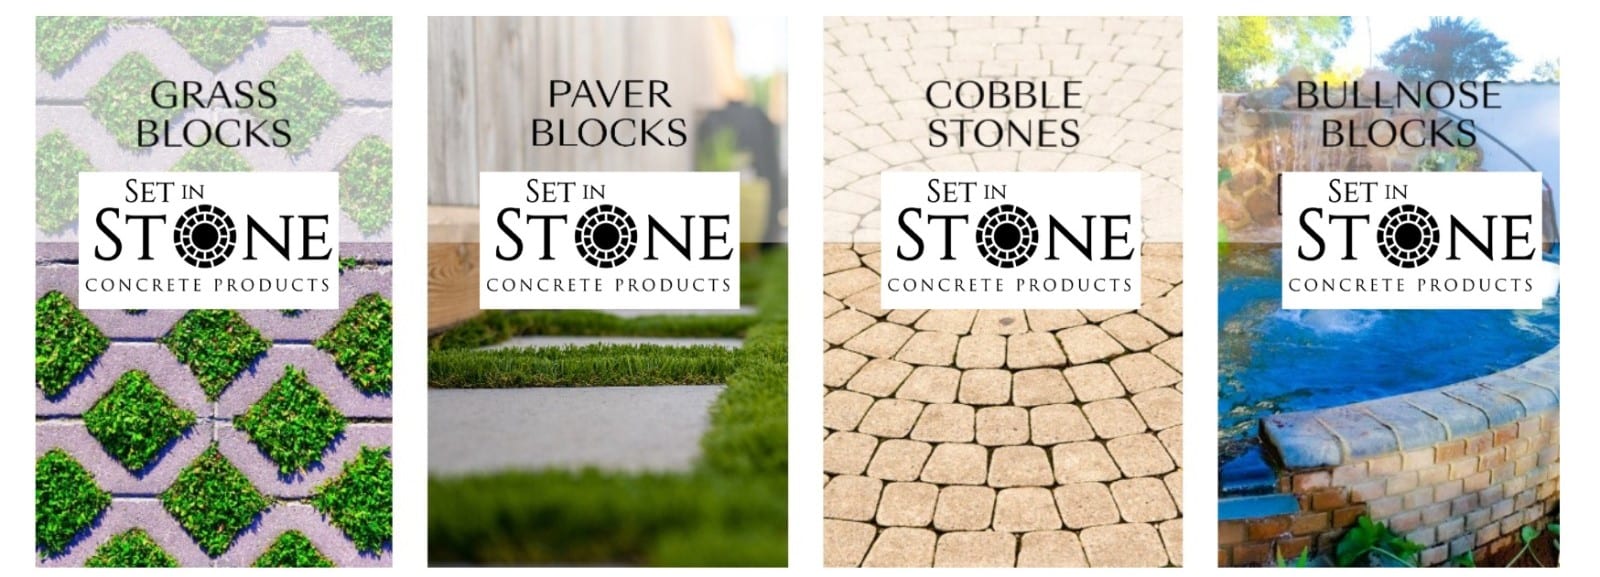 Set in Stone Concrete Products 10